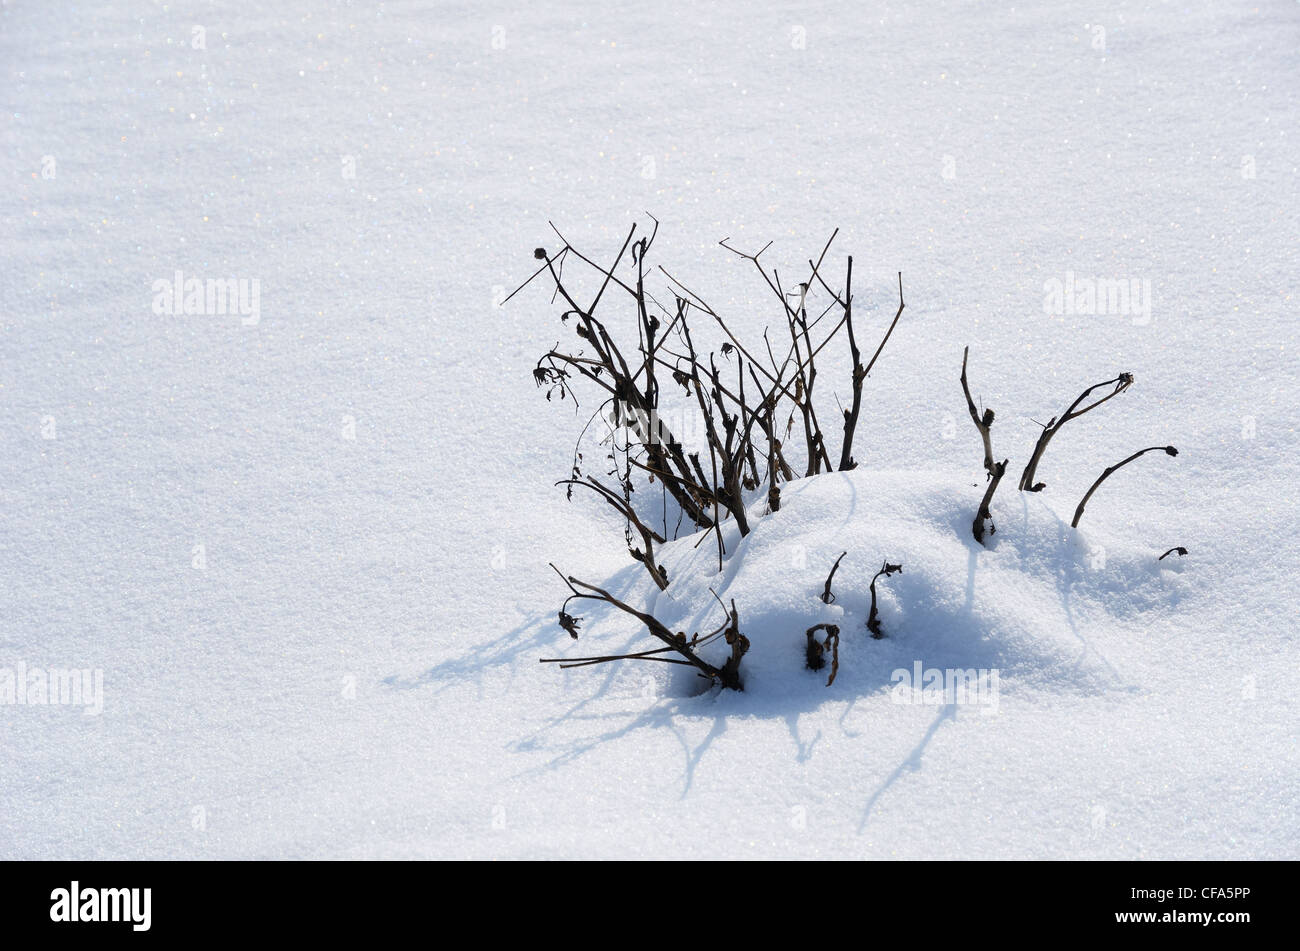 Snow cover and a snowbound bush. Stock Photo